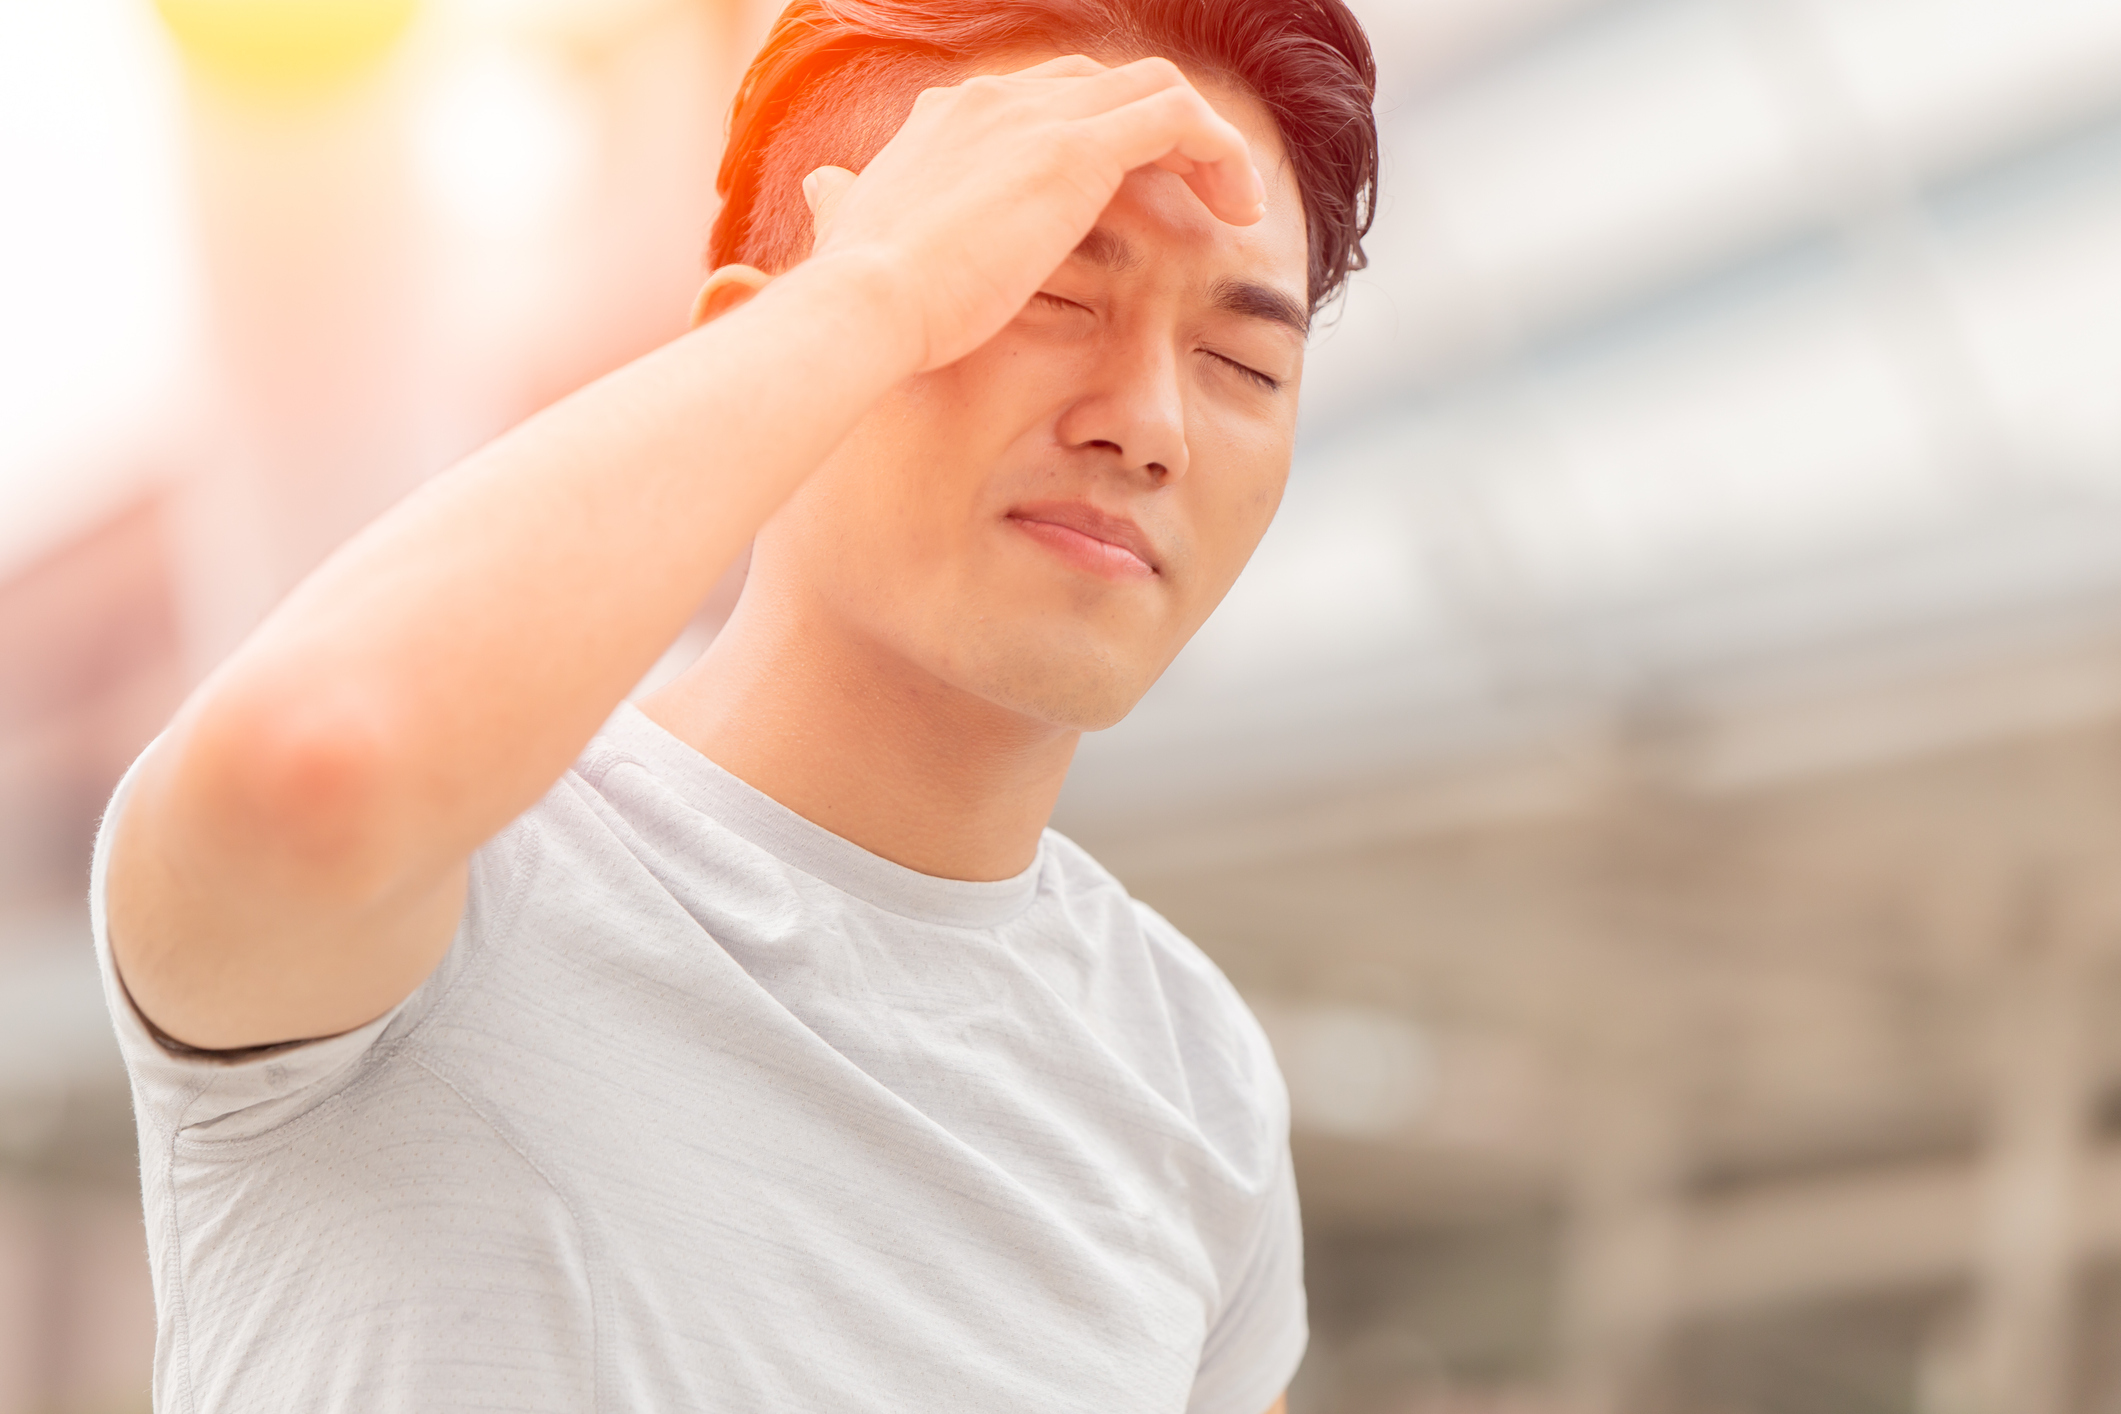 7 signs your headache may be heat stroke